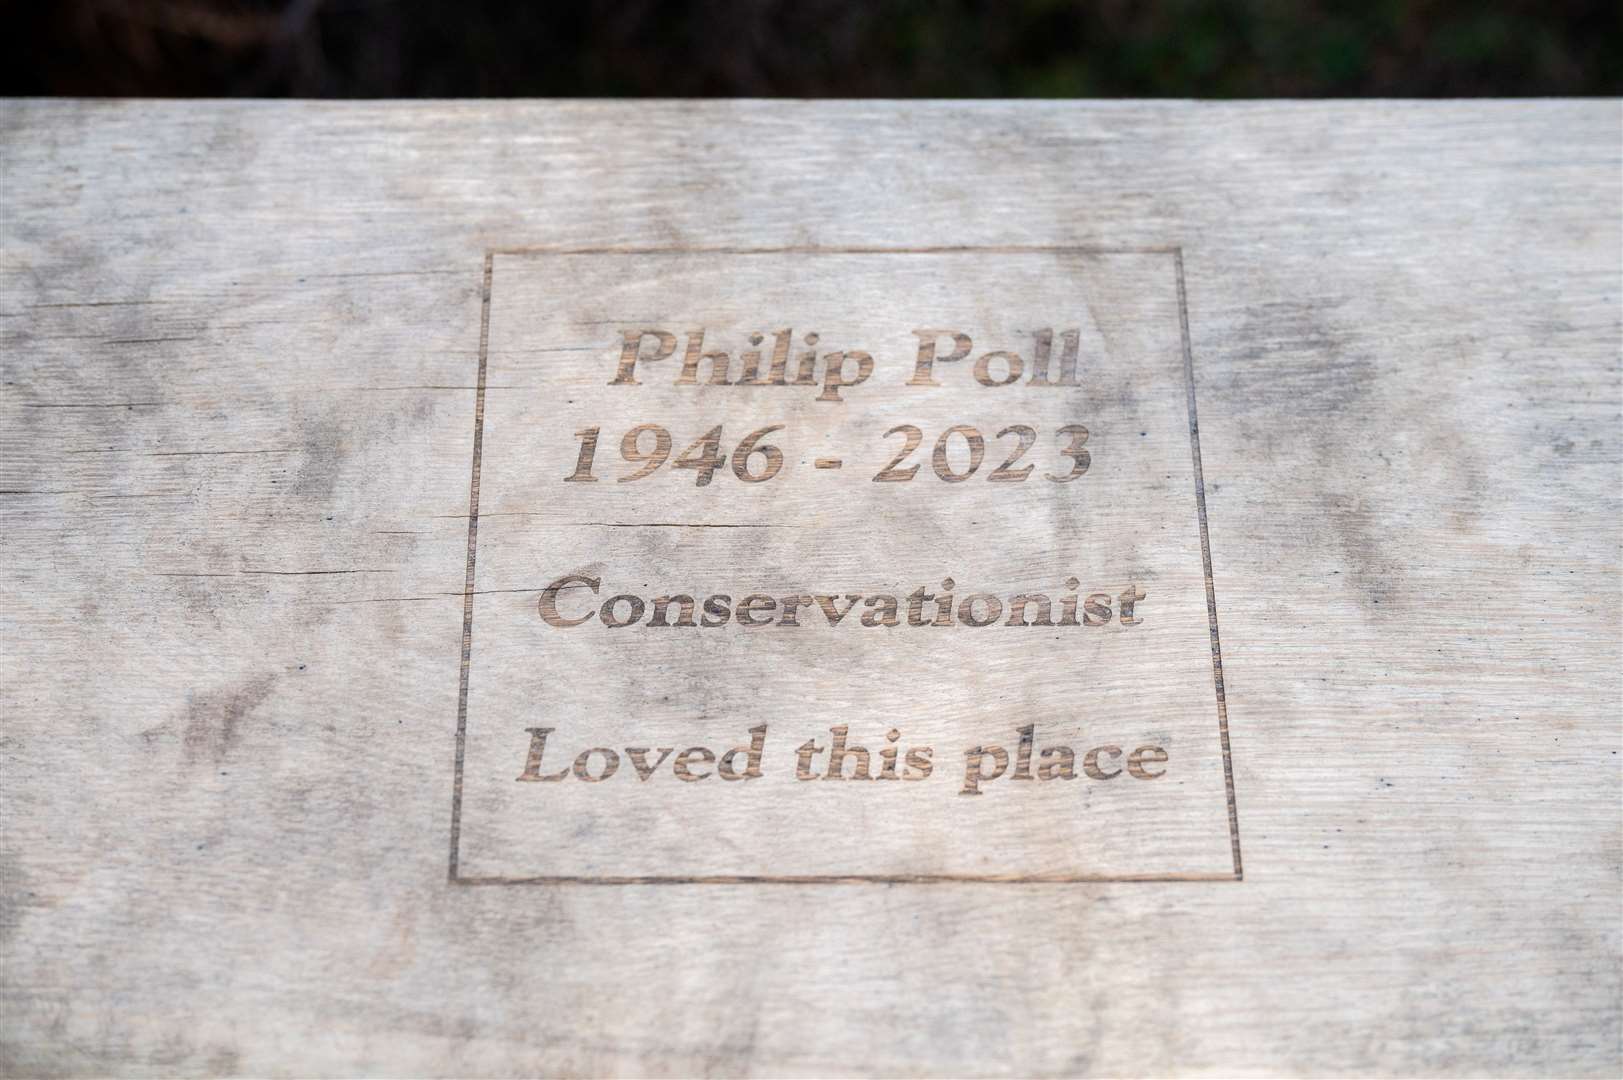 The inscription on the bench for Philip Poll